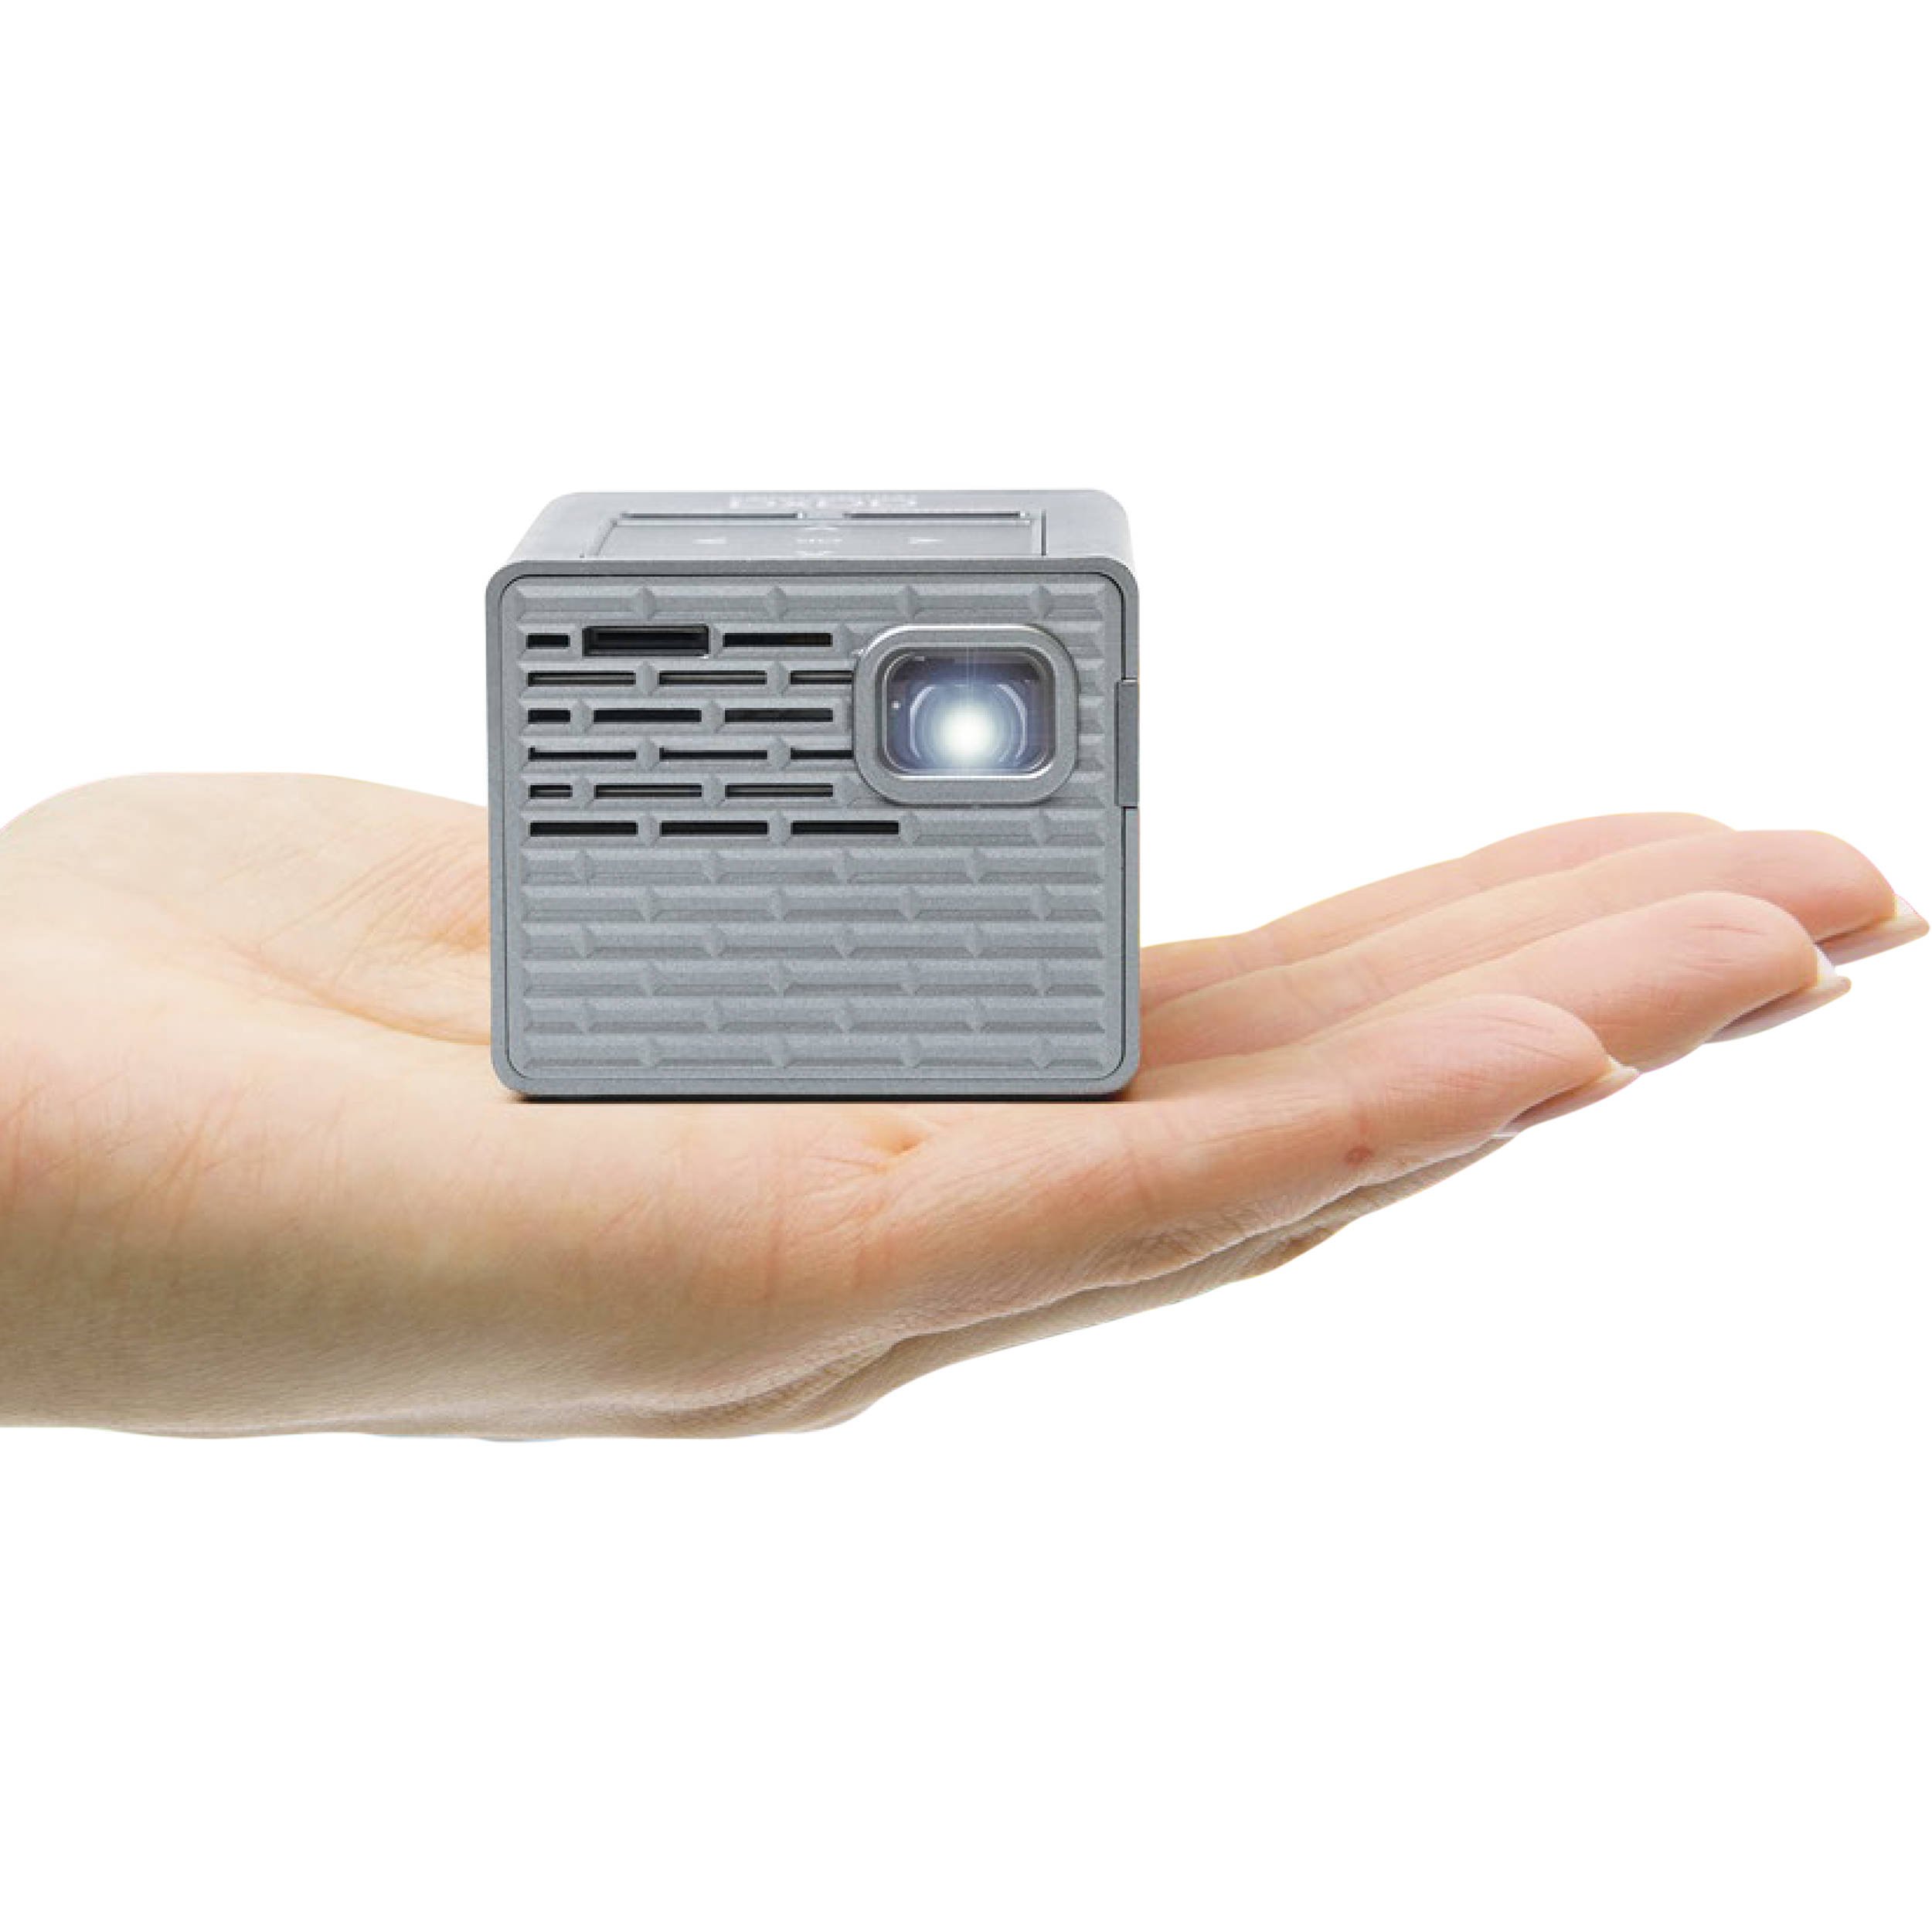 P2B Pico Projector - Very Small portable Entertainment any